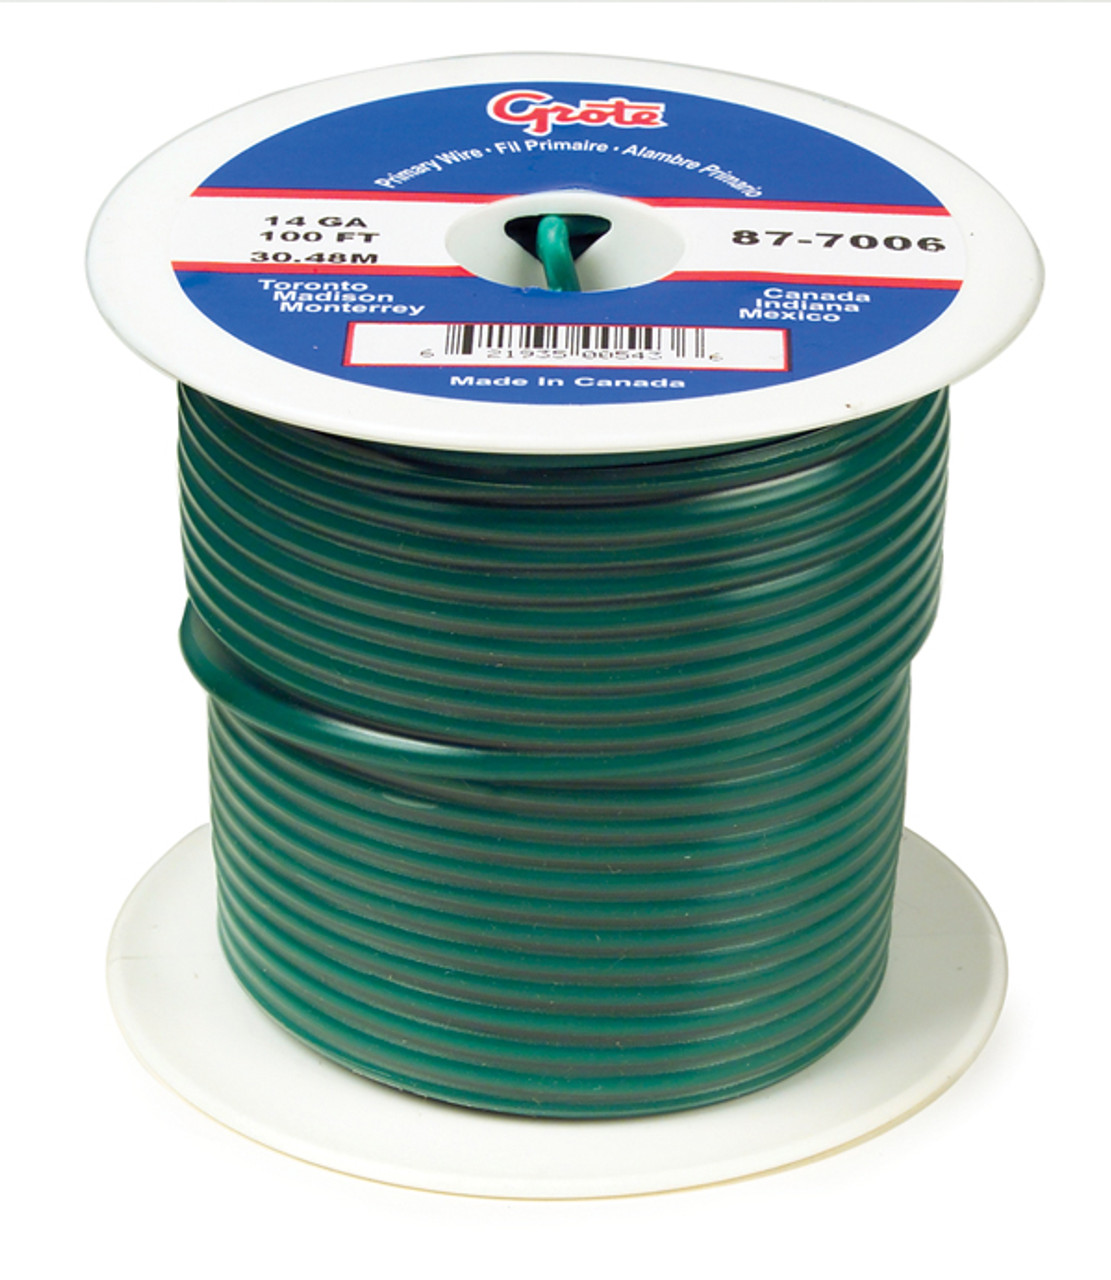 14 AWG General Purpose Thermo Plastic Wire @ 100' - Green  87-7006